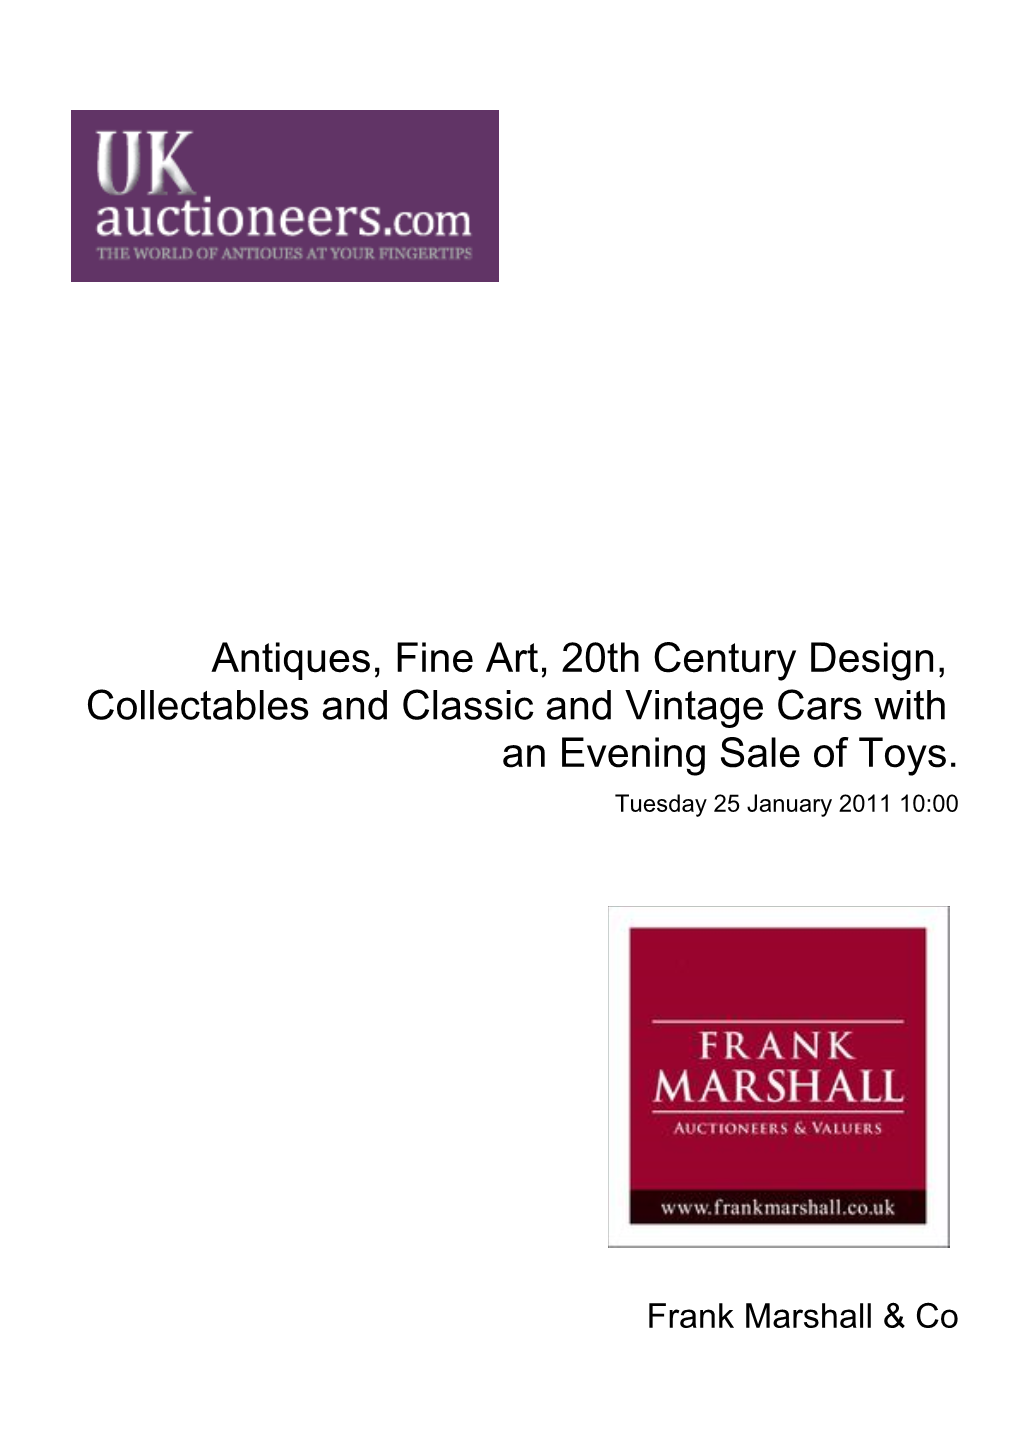 Antiques, Fine Art, 20Th Century Design, Collectables and Classic and Vintage Cars with an Evening Sale of Toys. Tuesday 25 January 2011 10:00